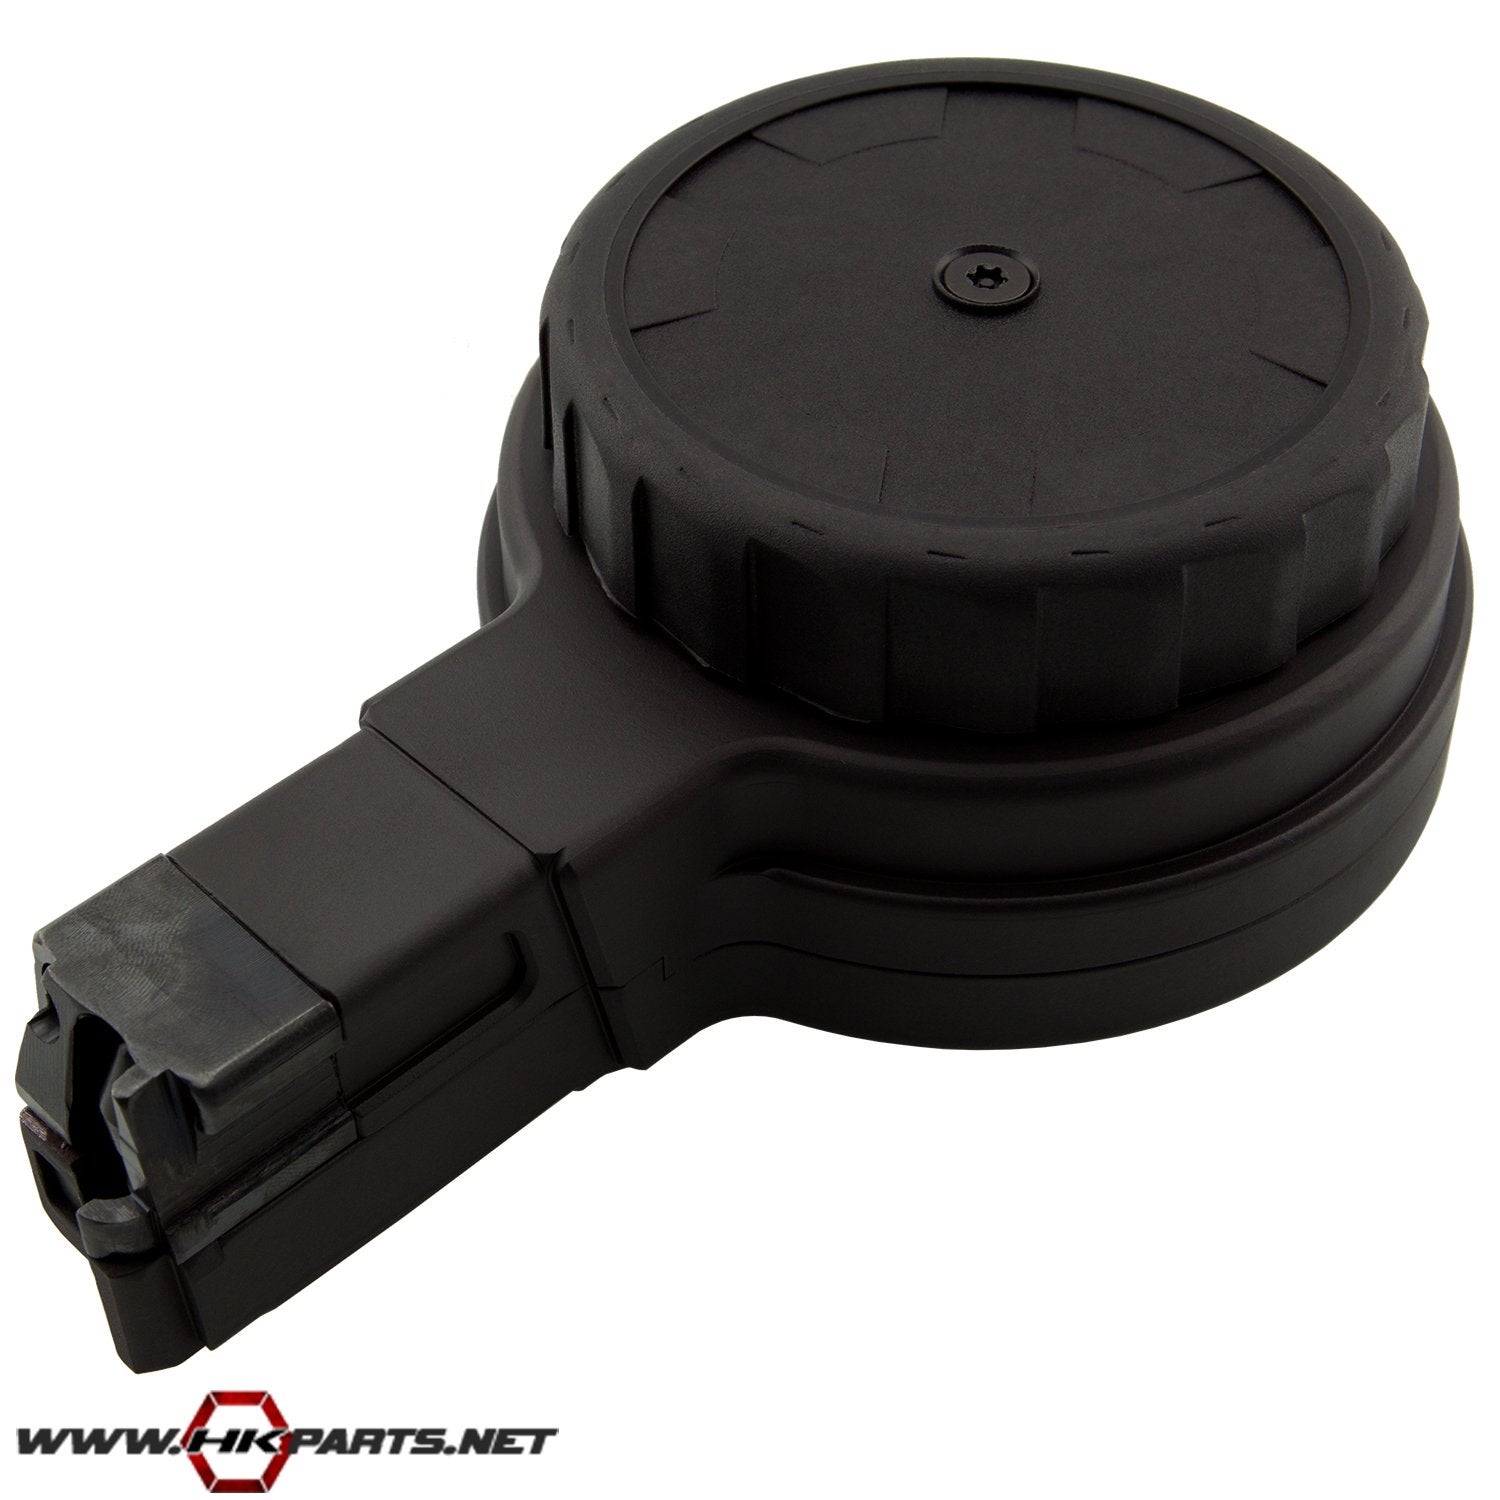 X Products 50rnd X 5 Mp5 Drum Magazine At Hkparts The.